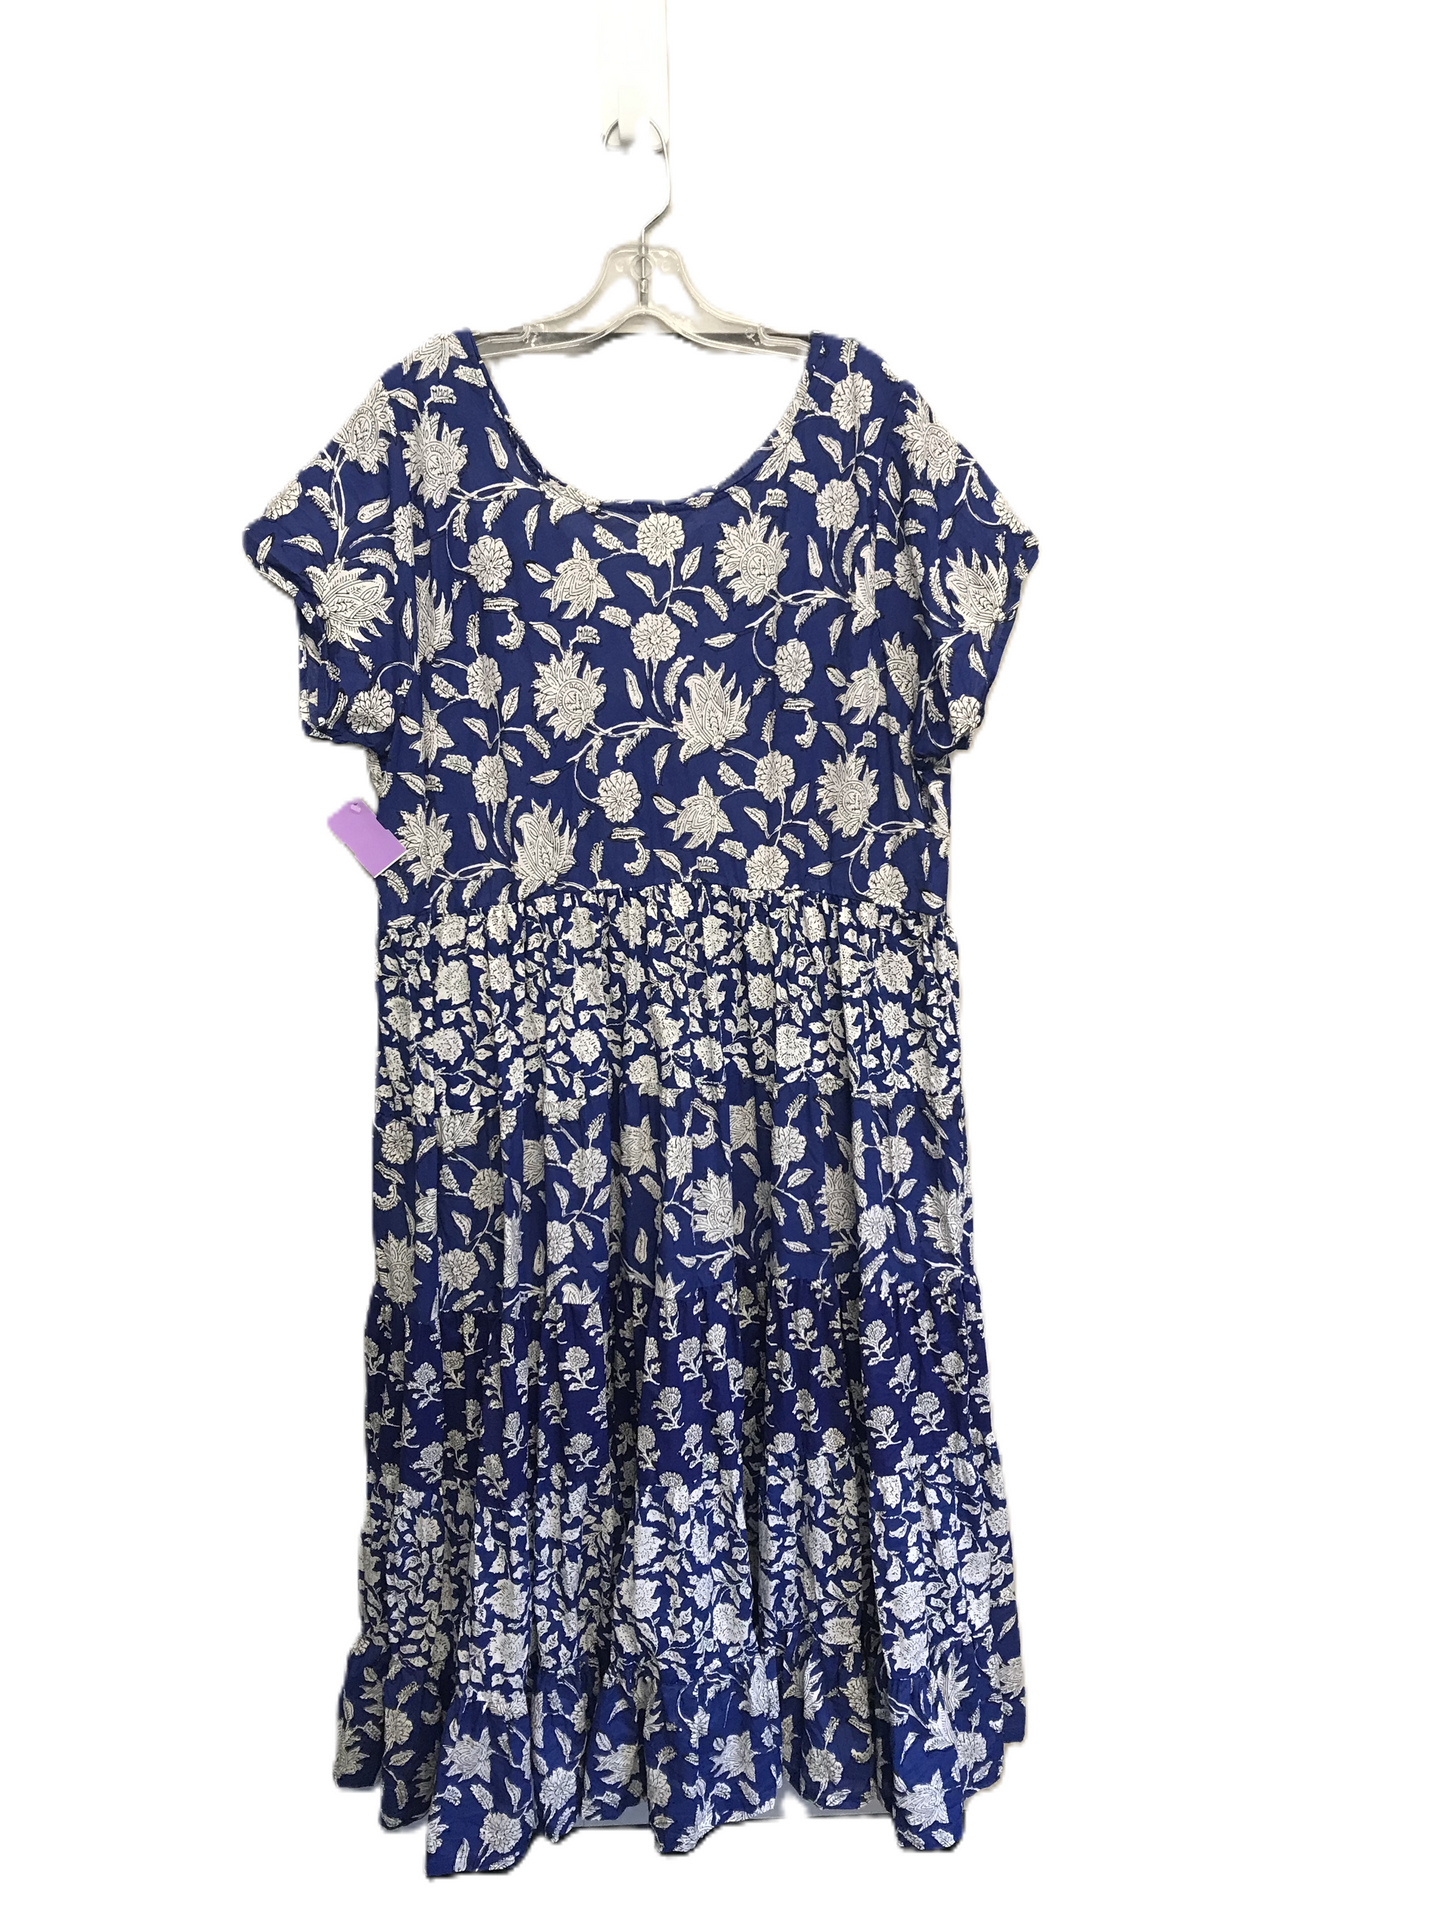 Floral Print Dress Casual Maxi By Soft Surroundings, Size: 1x